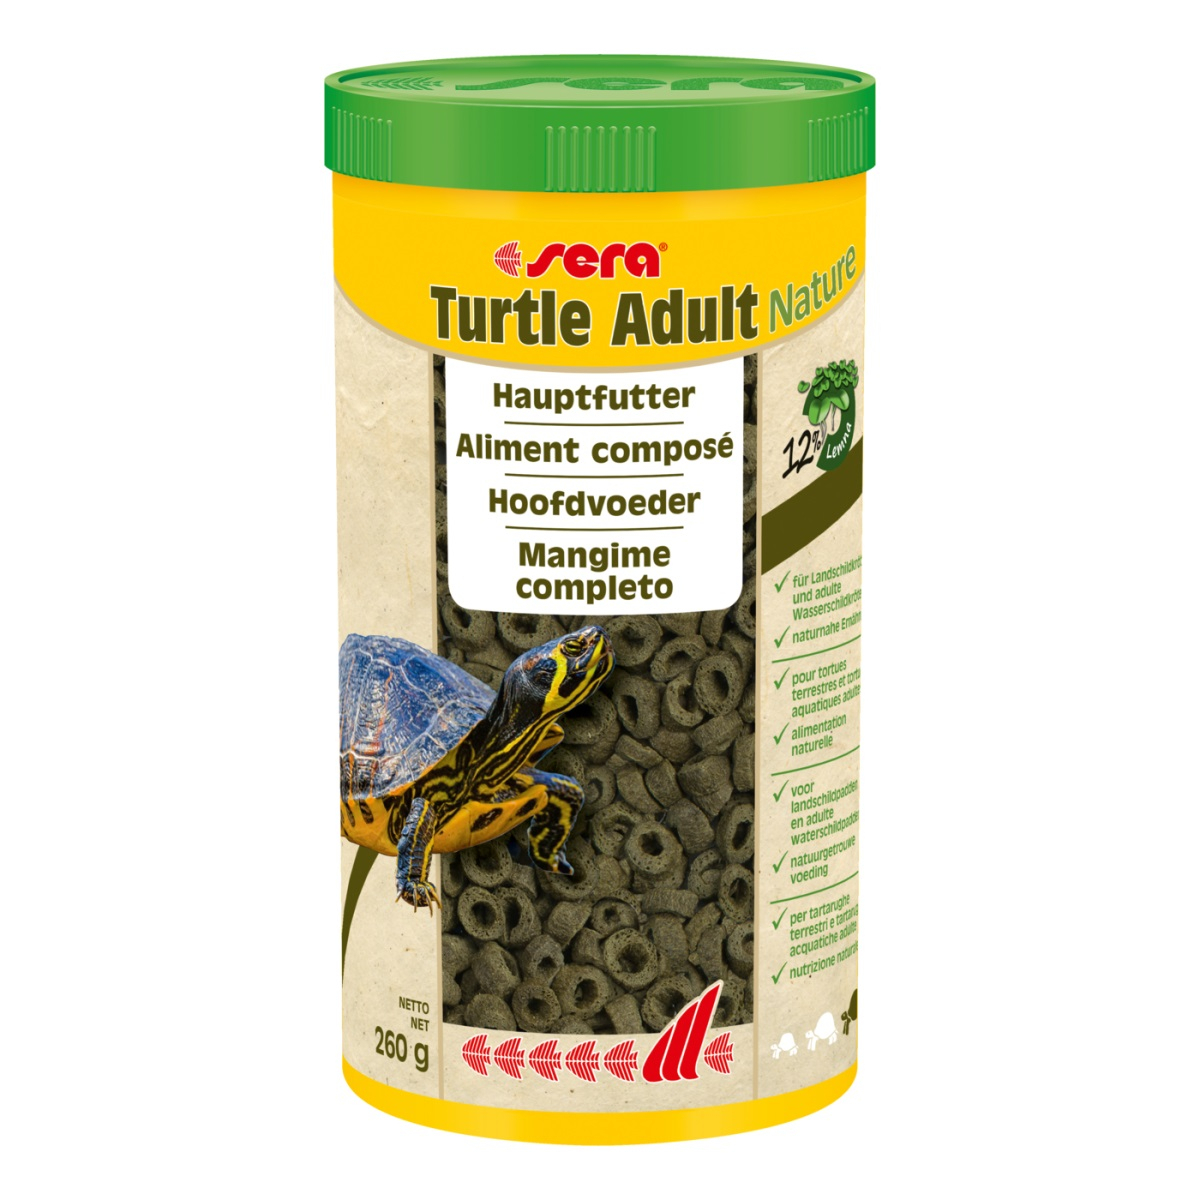 SERA Turtle Adult Nature Aliment pour tortues adultes